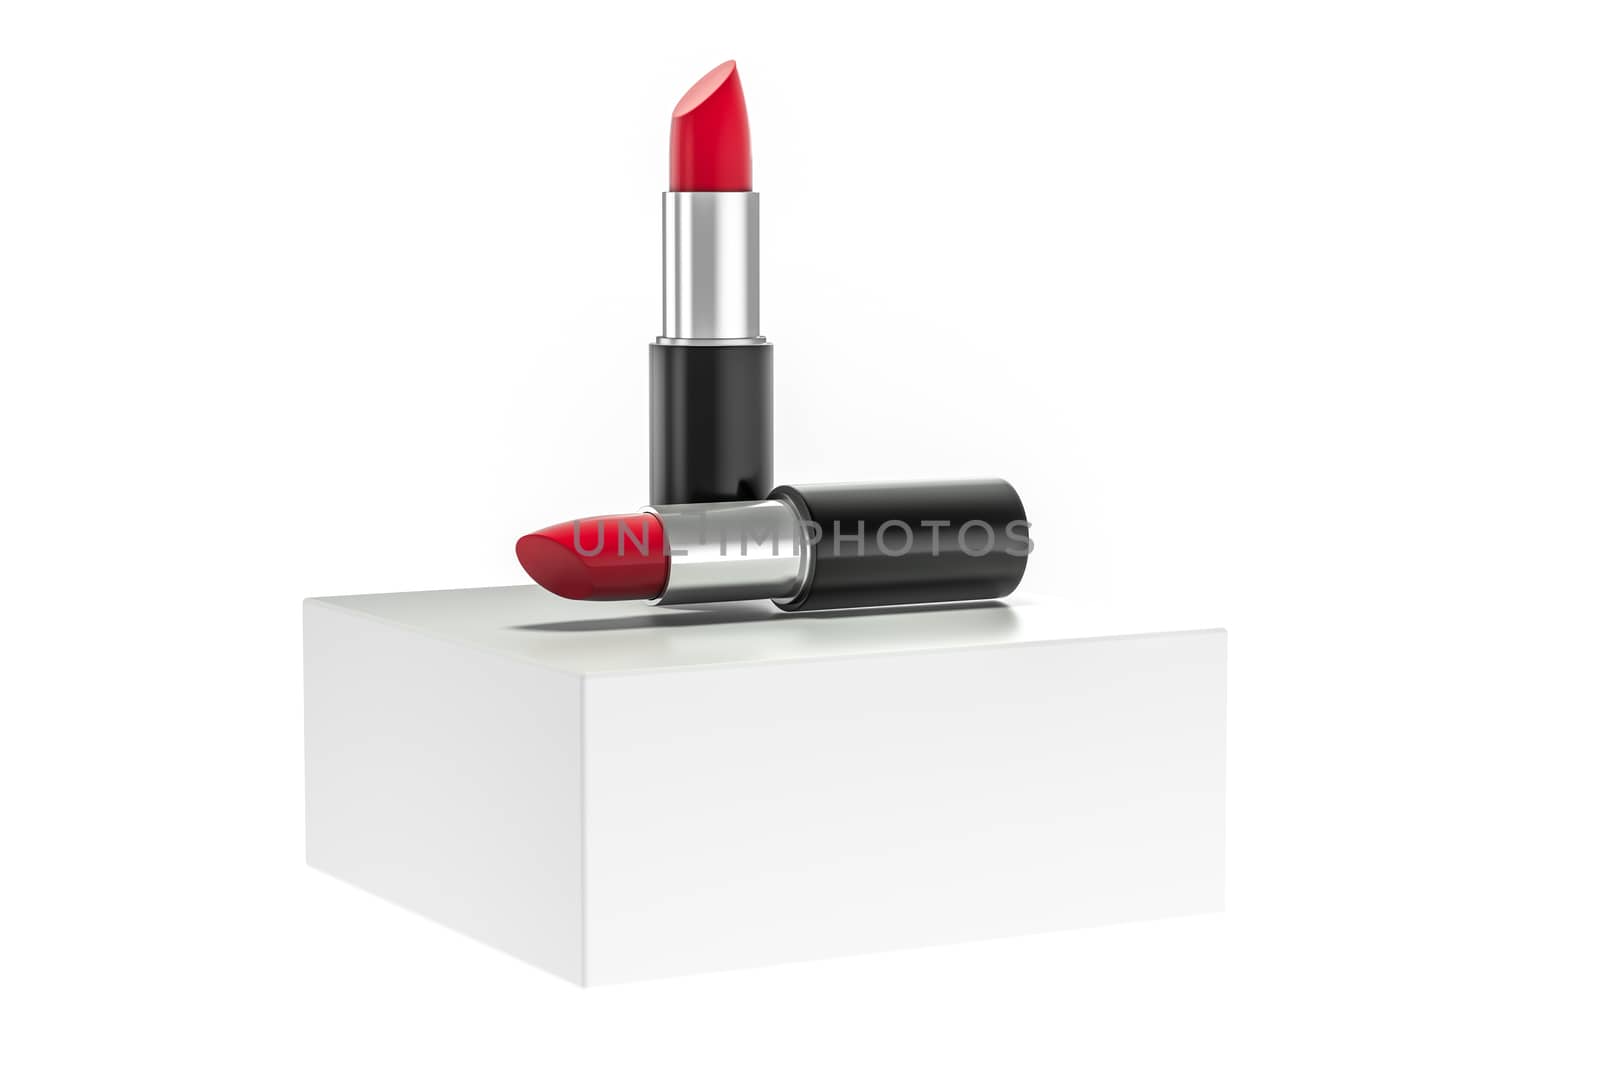 Lipstick with light color background, product photography, 3d rendering. by vinkfan